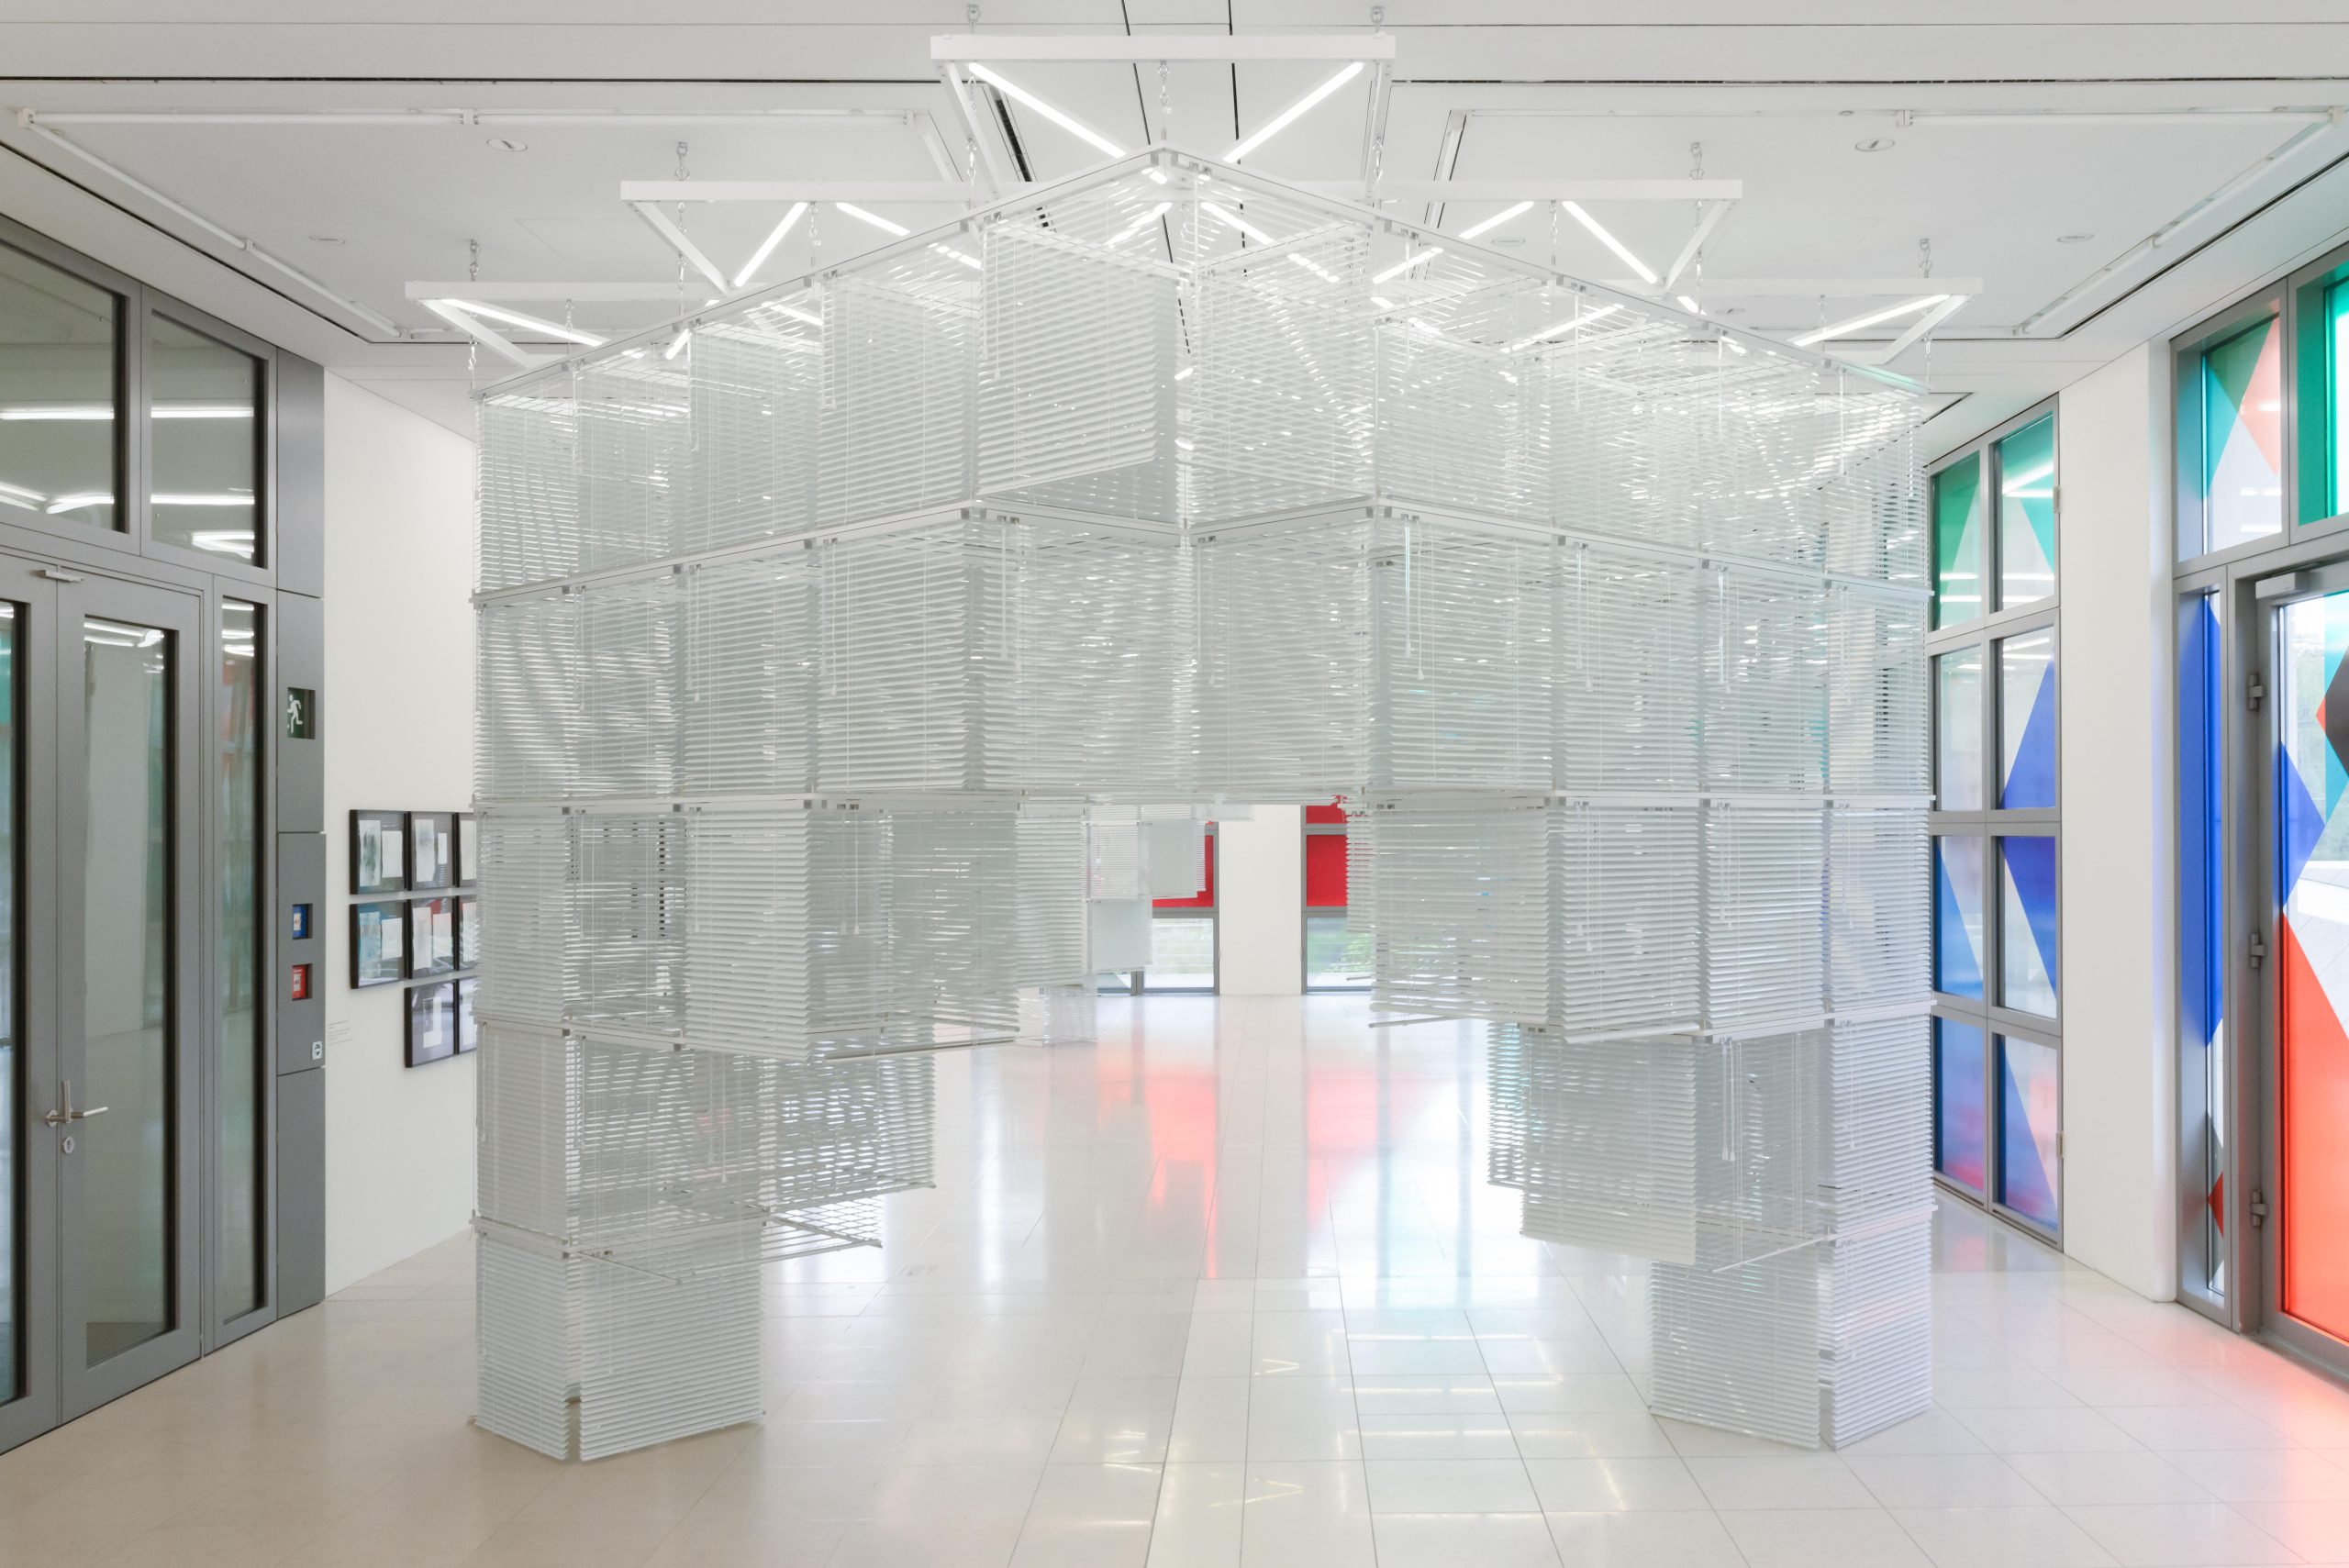 A structure made from white venetian blinds hangs from the ceiling to the floor in a gallery space.